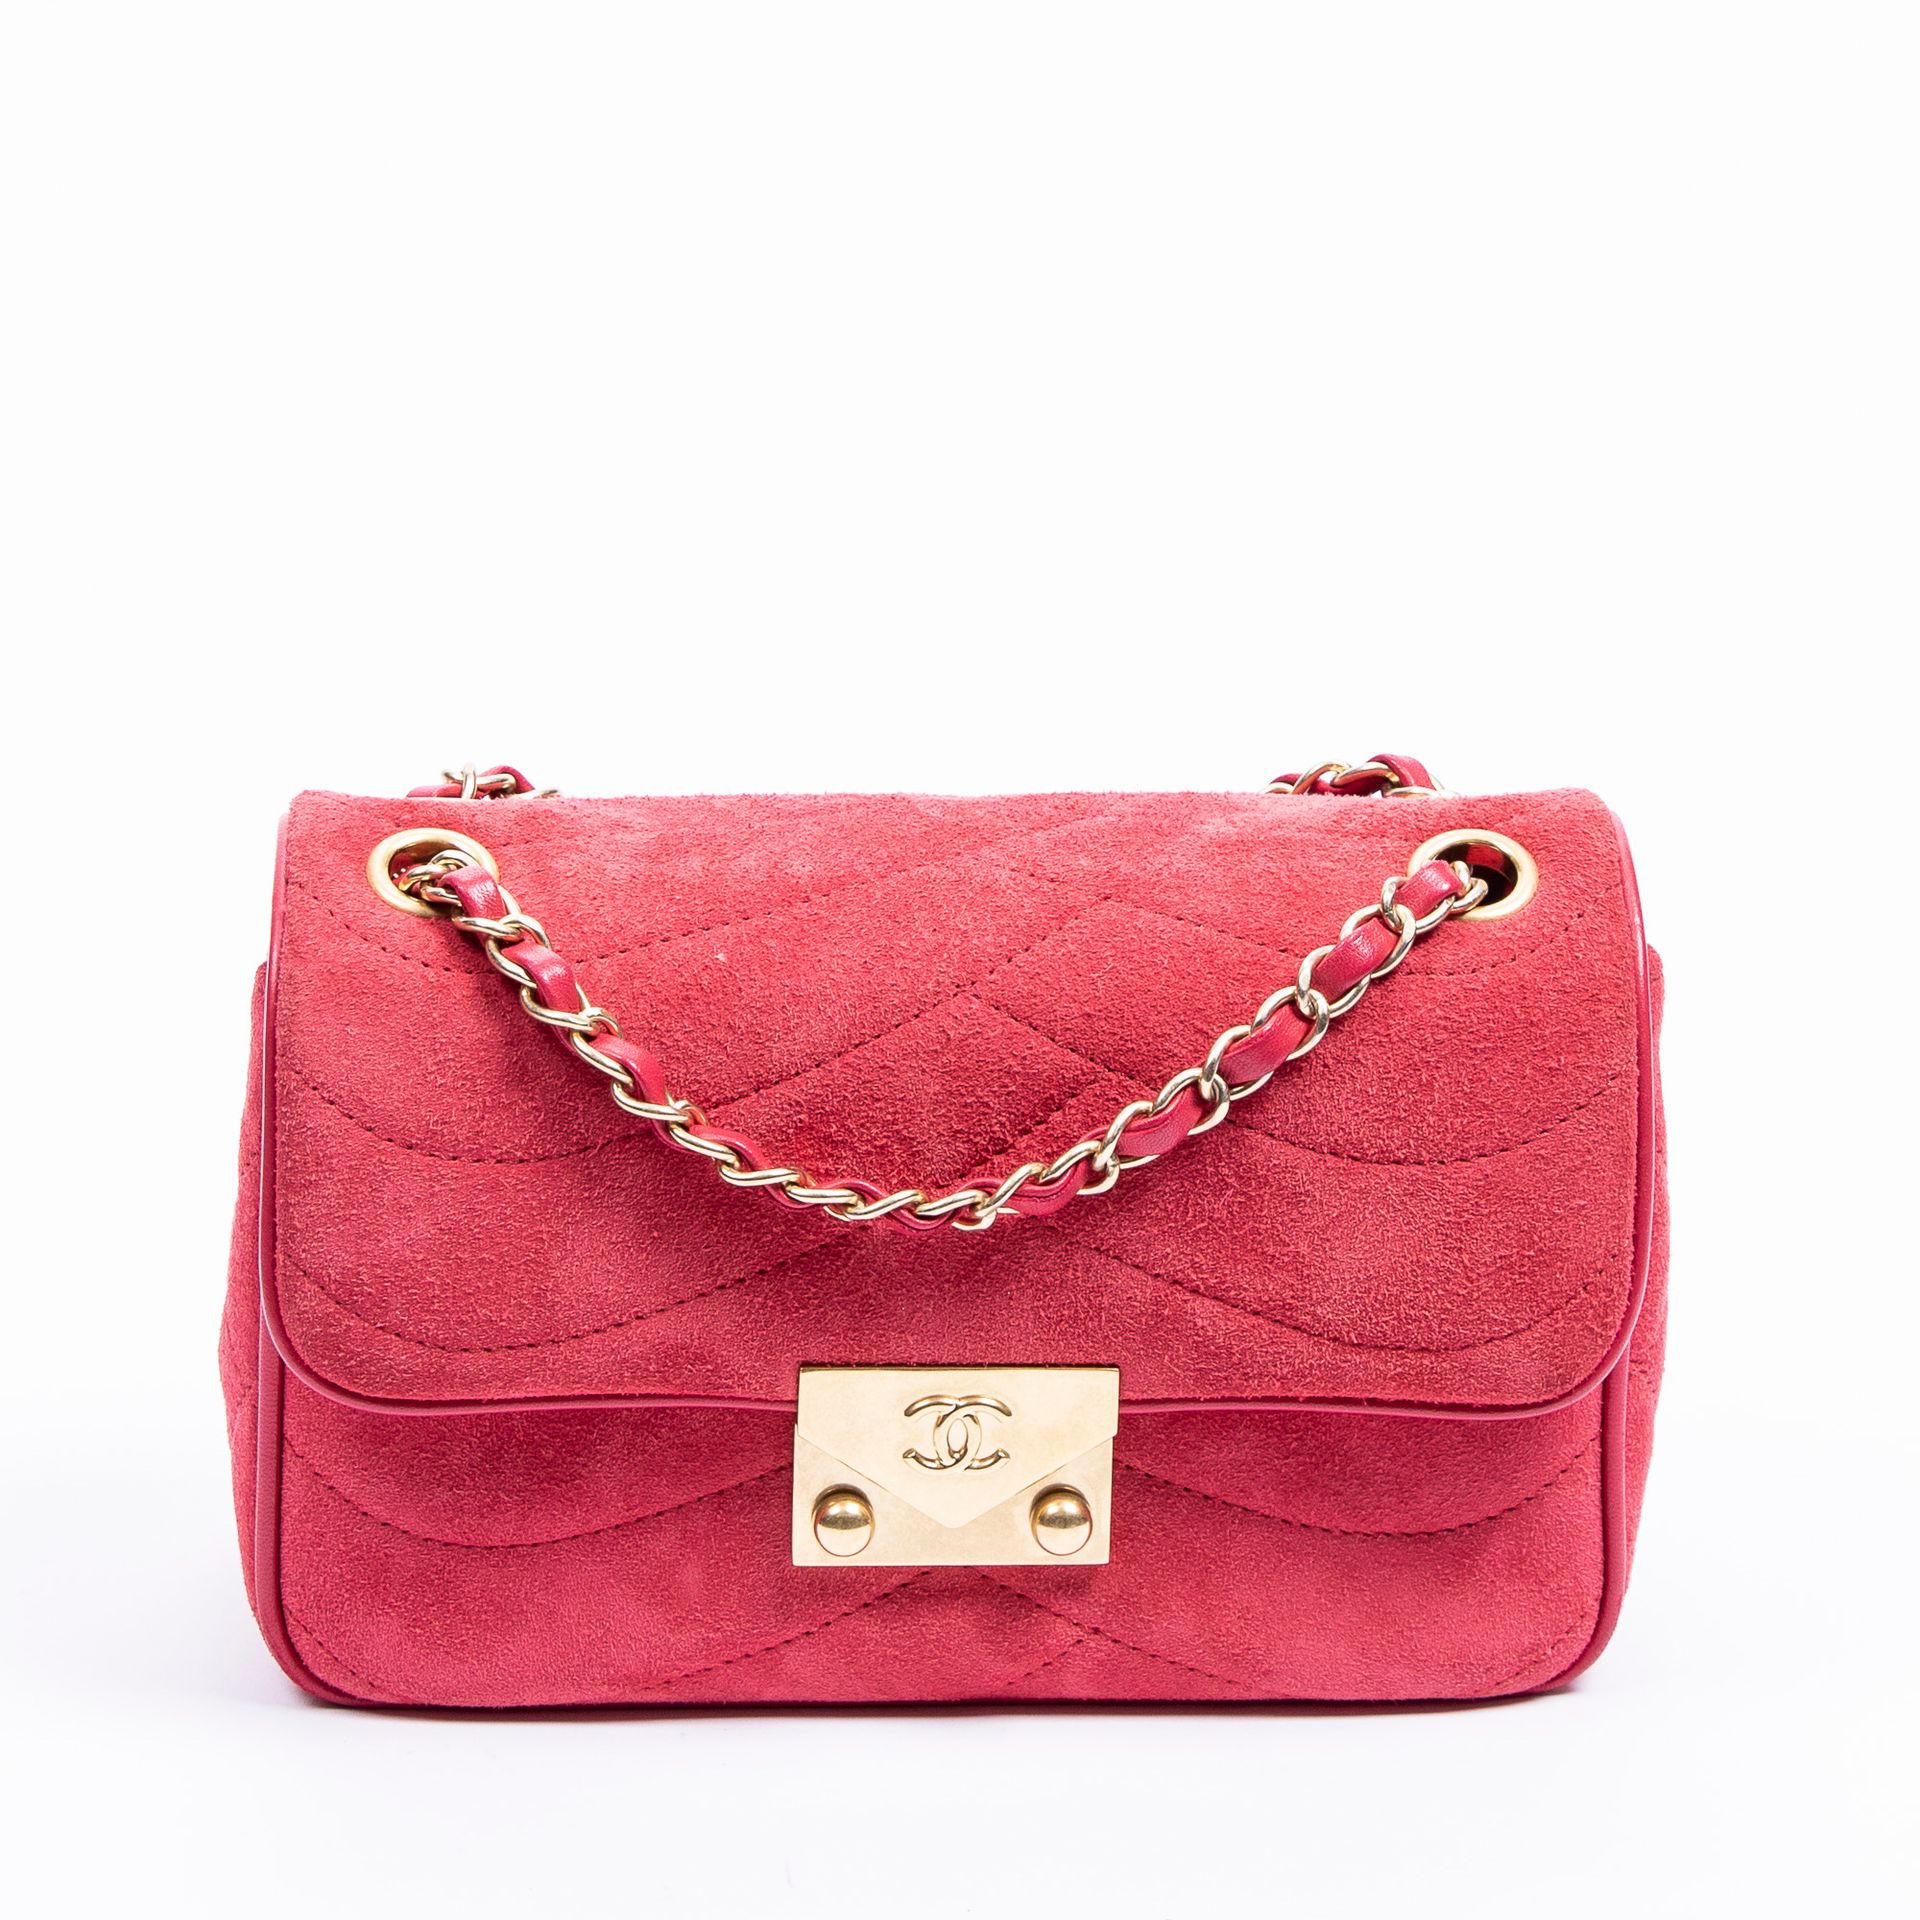 Chanel CHANEL - Velvet leather and fuchsia pink lambskin box size bag - Pink lam&hellip;